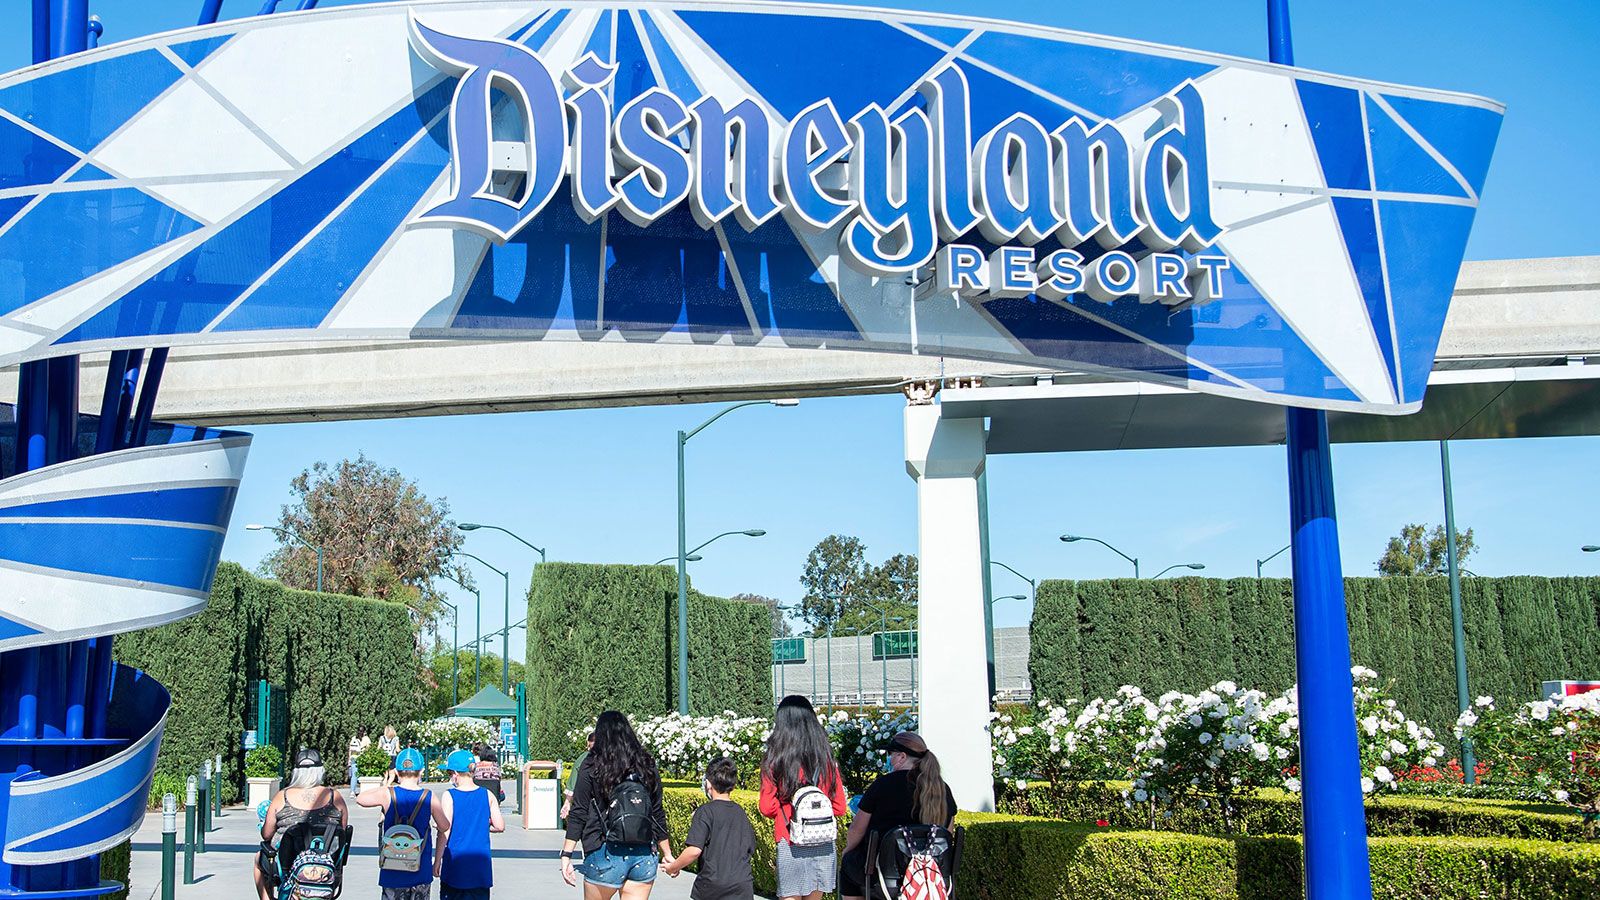 Visitors enter Disneyland in Anaheim, California, in this file photo from 2021. One person was tran...